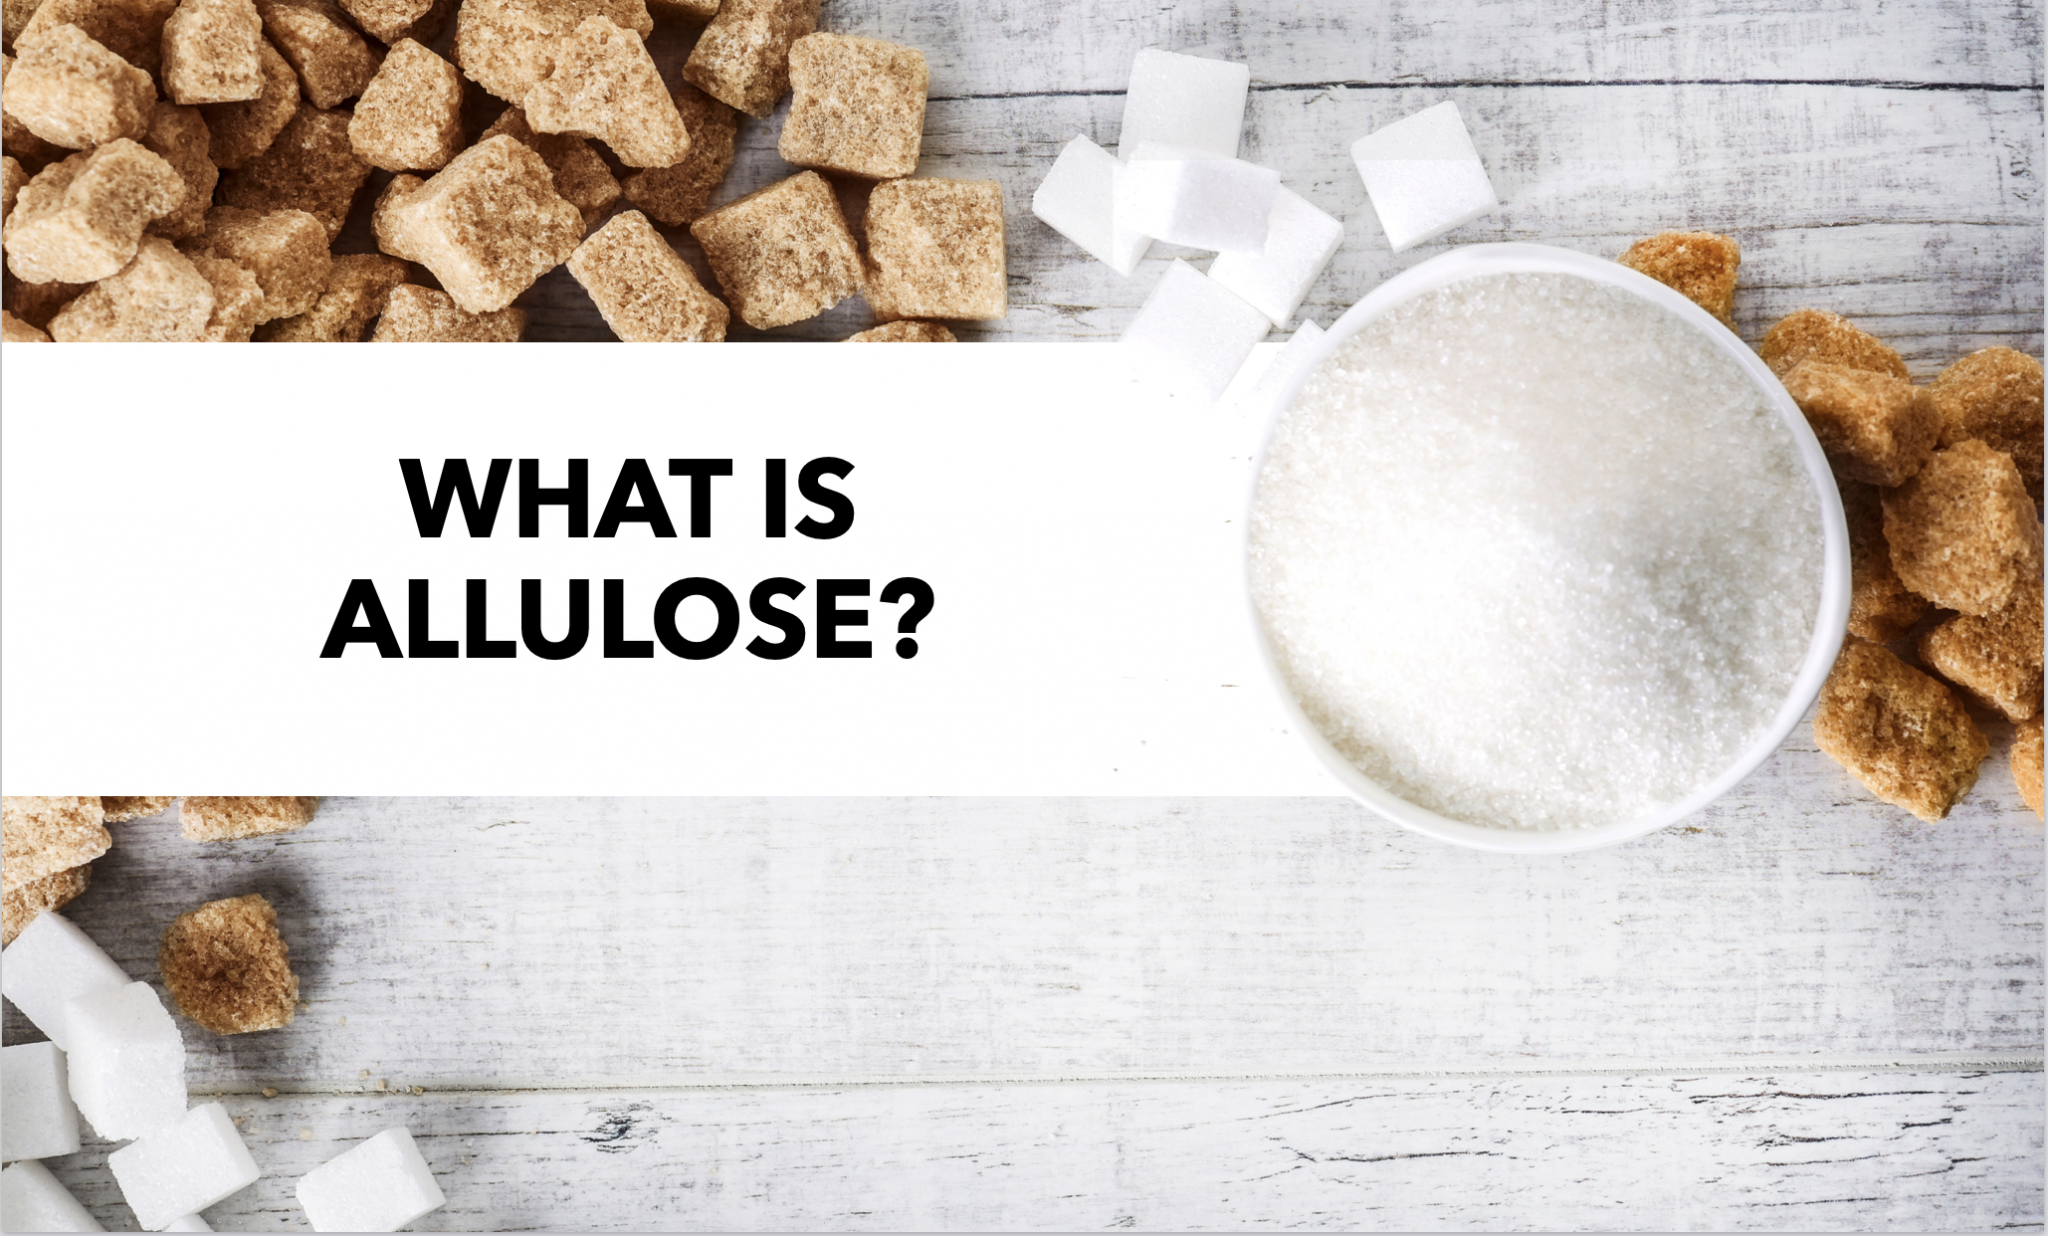 What is Allulose and what are the advantages of Allulose？